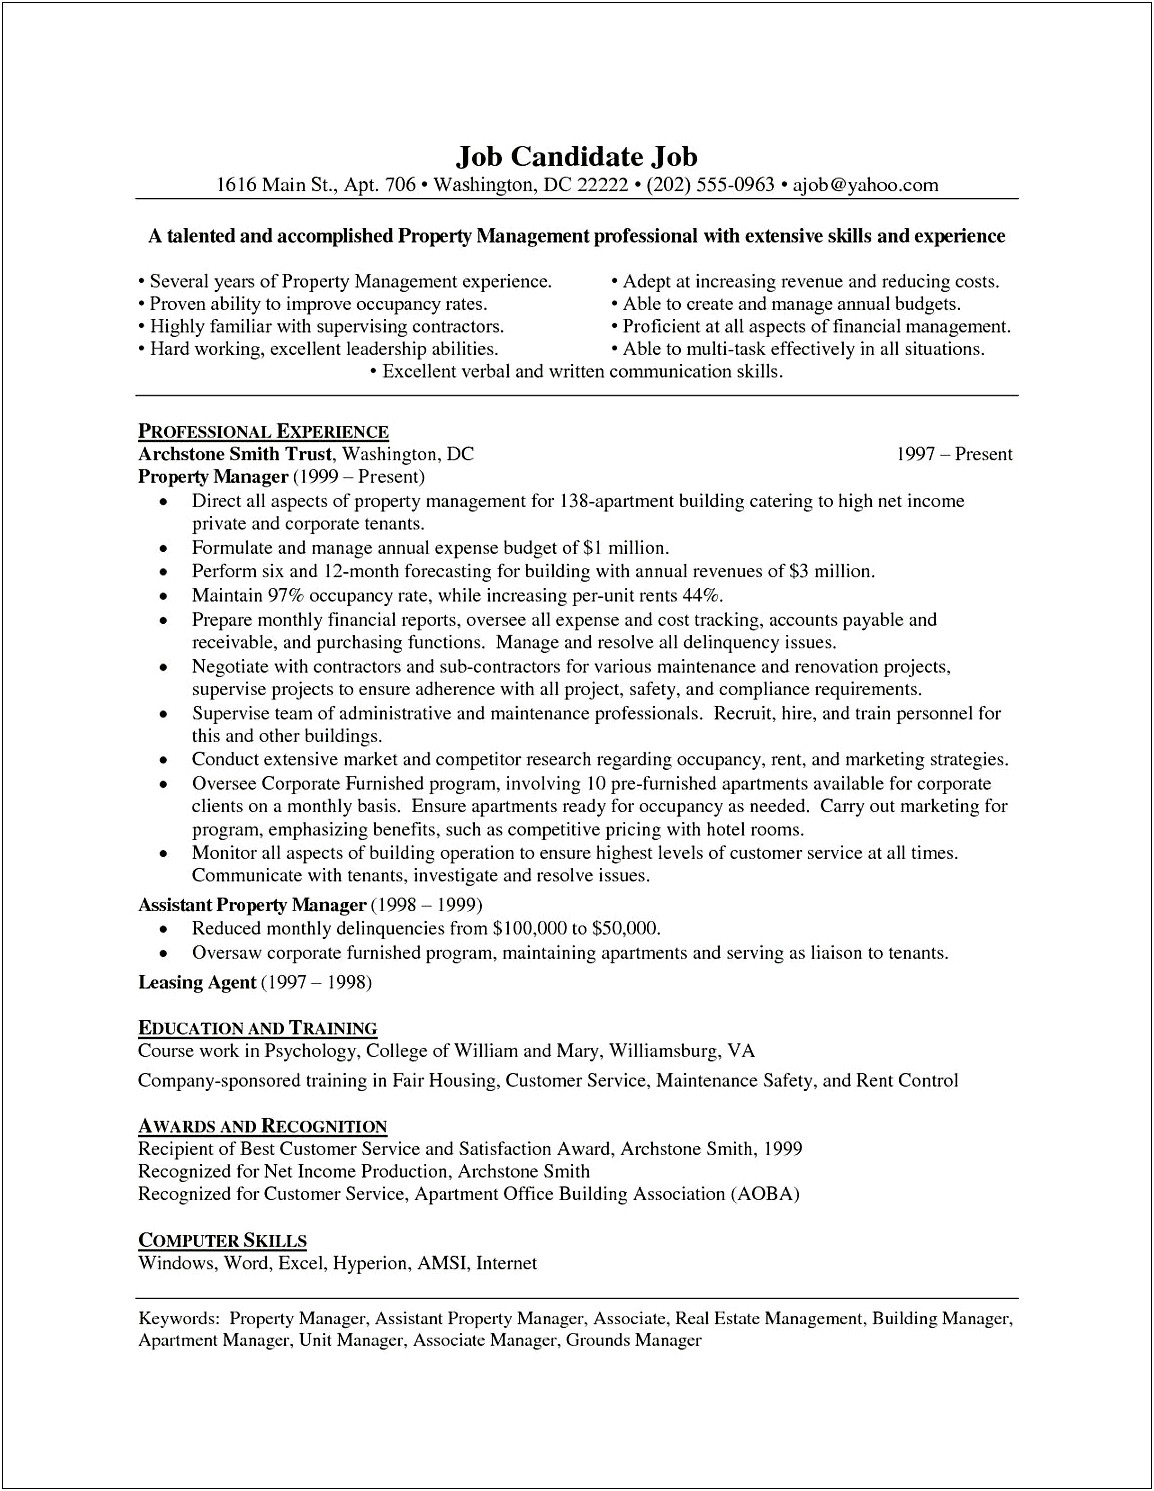 Assistant Community Manager Resume Sample